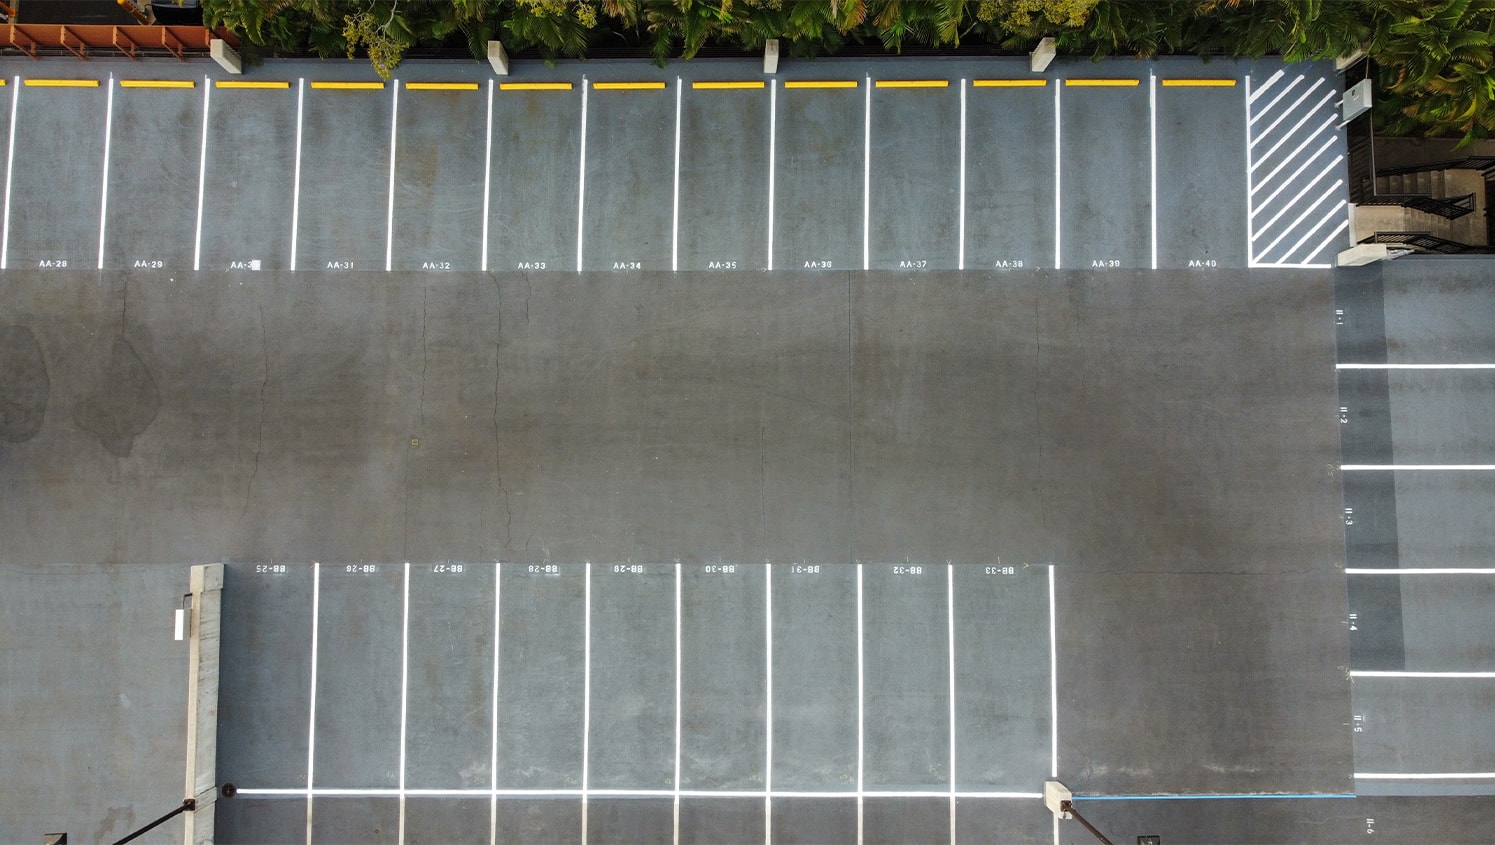 aerial view of parking lot with freshly painted fire lane markings